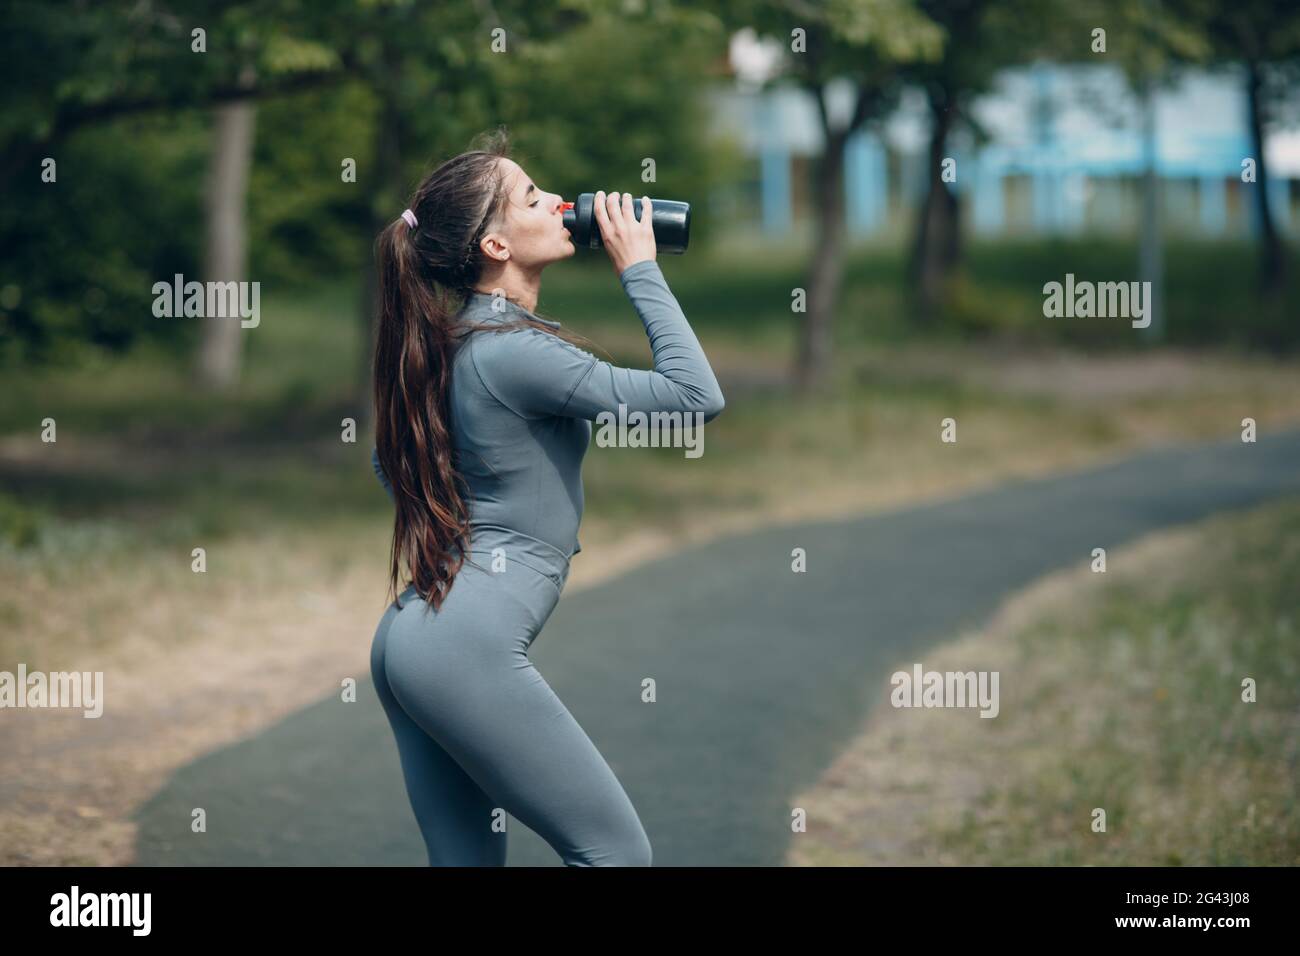 Tired woman jogger in gray tracksuit drinking bottled water after jogging in park Stock Photo